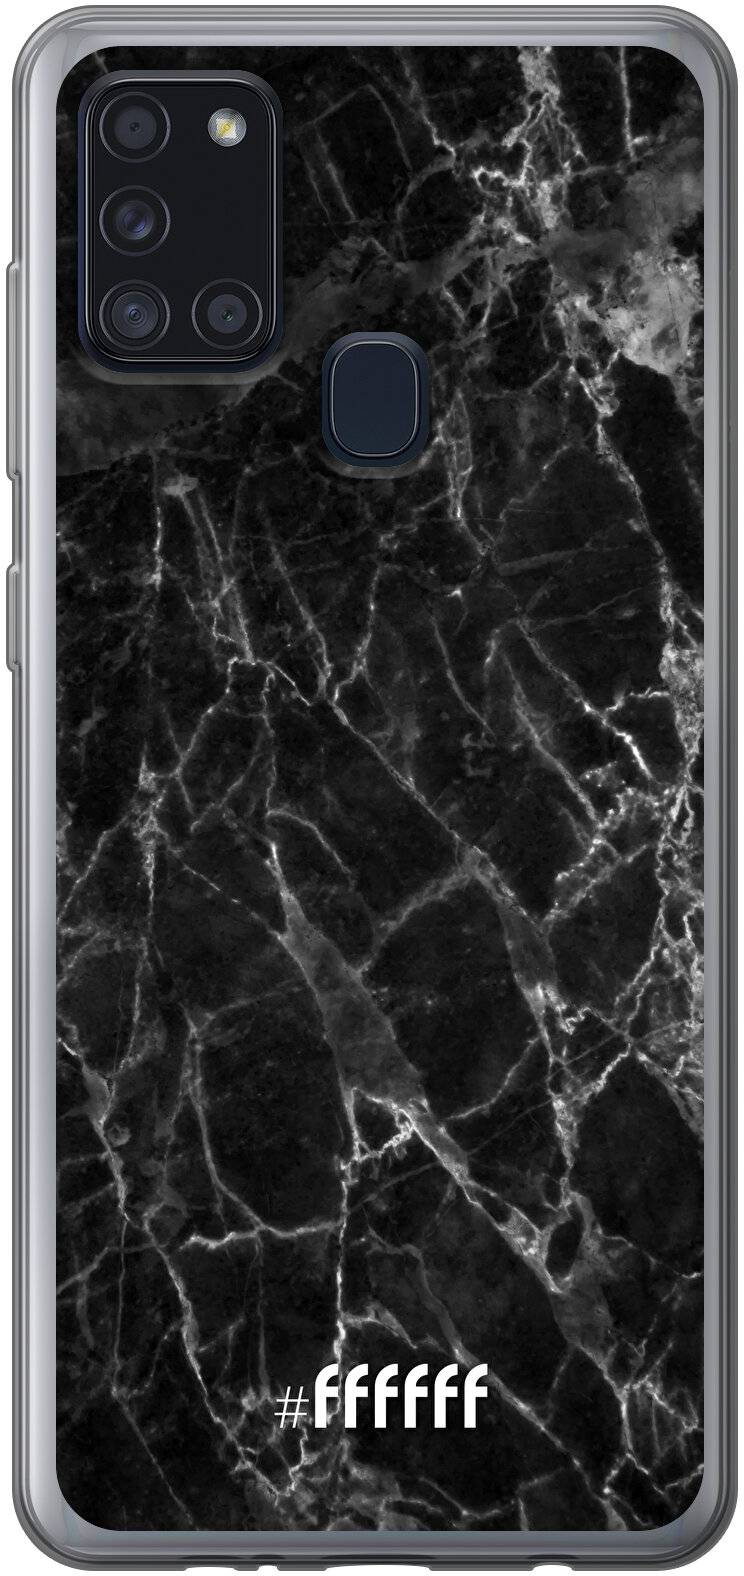 Shattered Marble Galaxy A21s